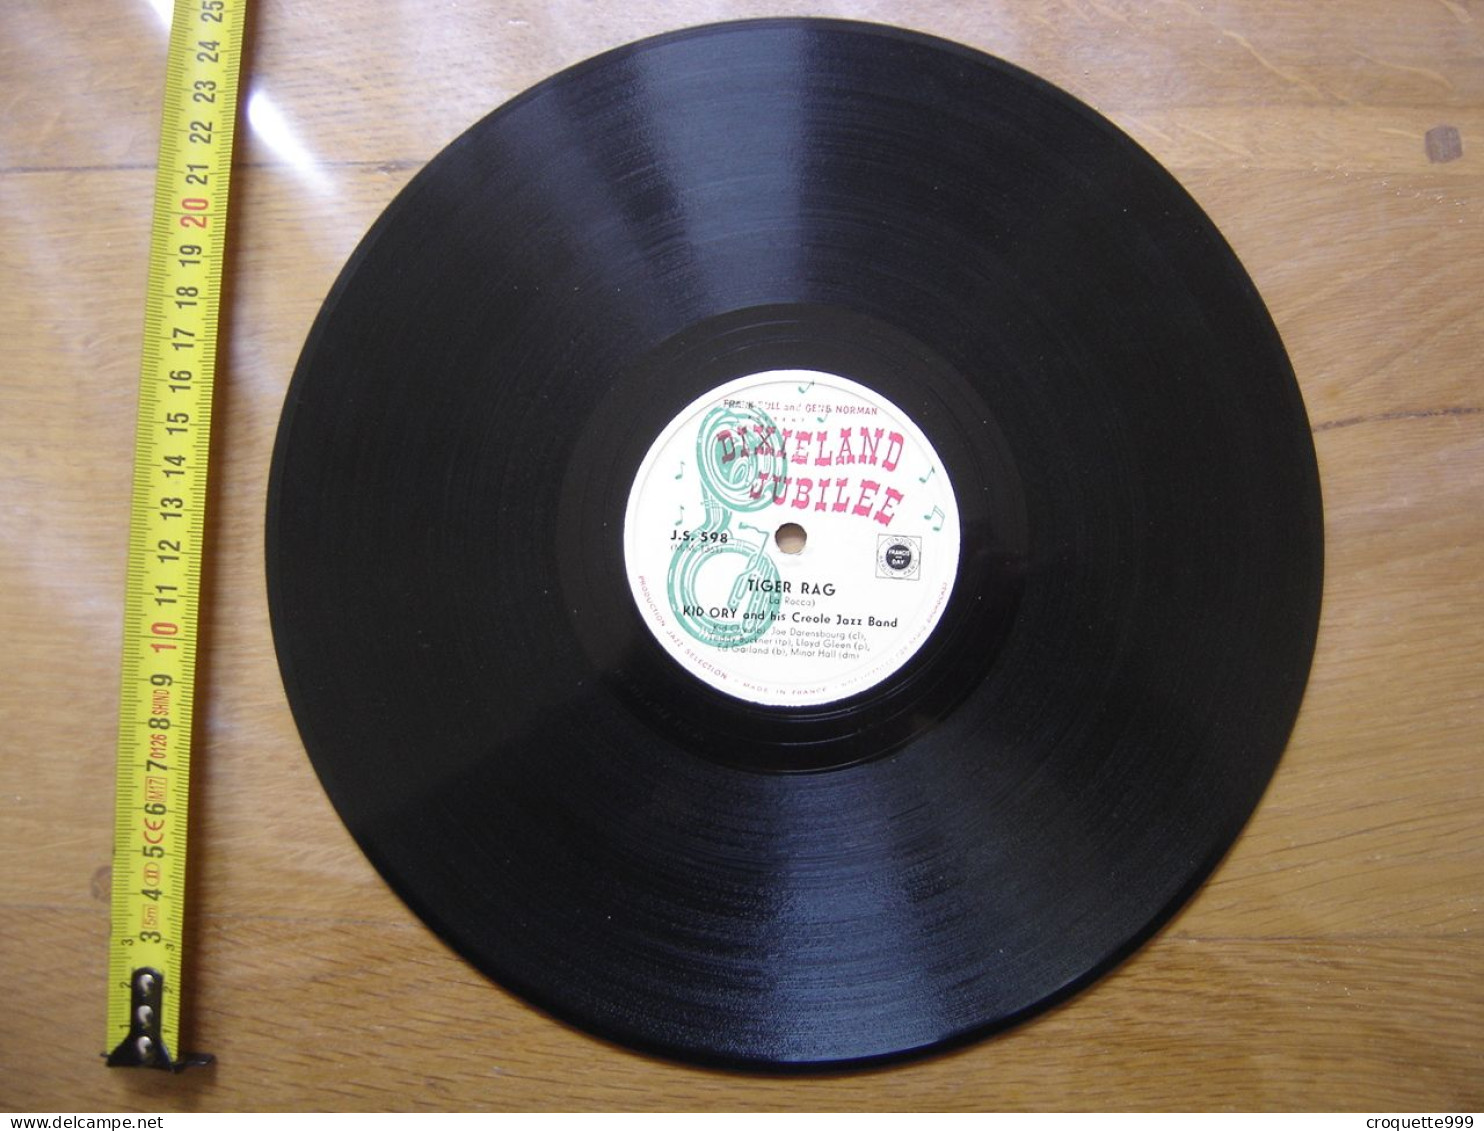 Disque 78 Tours 25 Cm KID ORY And His Creole Jazz Band Dixieland Jubilee J.S. 598 TIGER RAG EH LA BAS - 78 Rpm - Gramophone Records